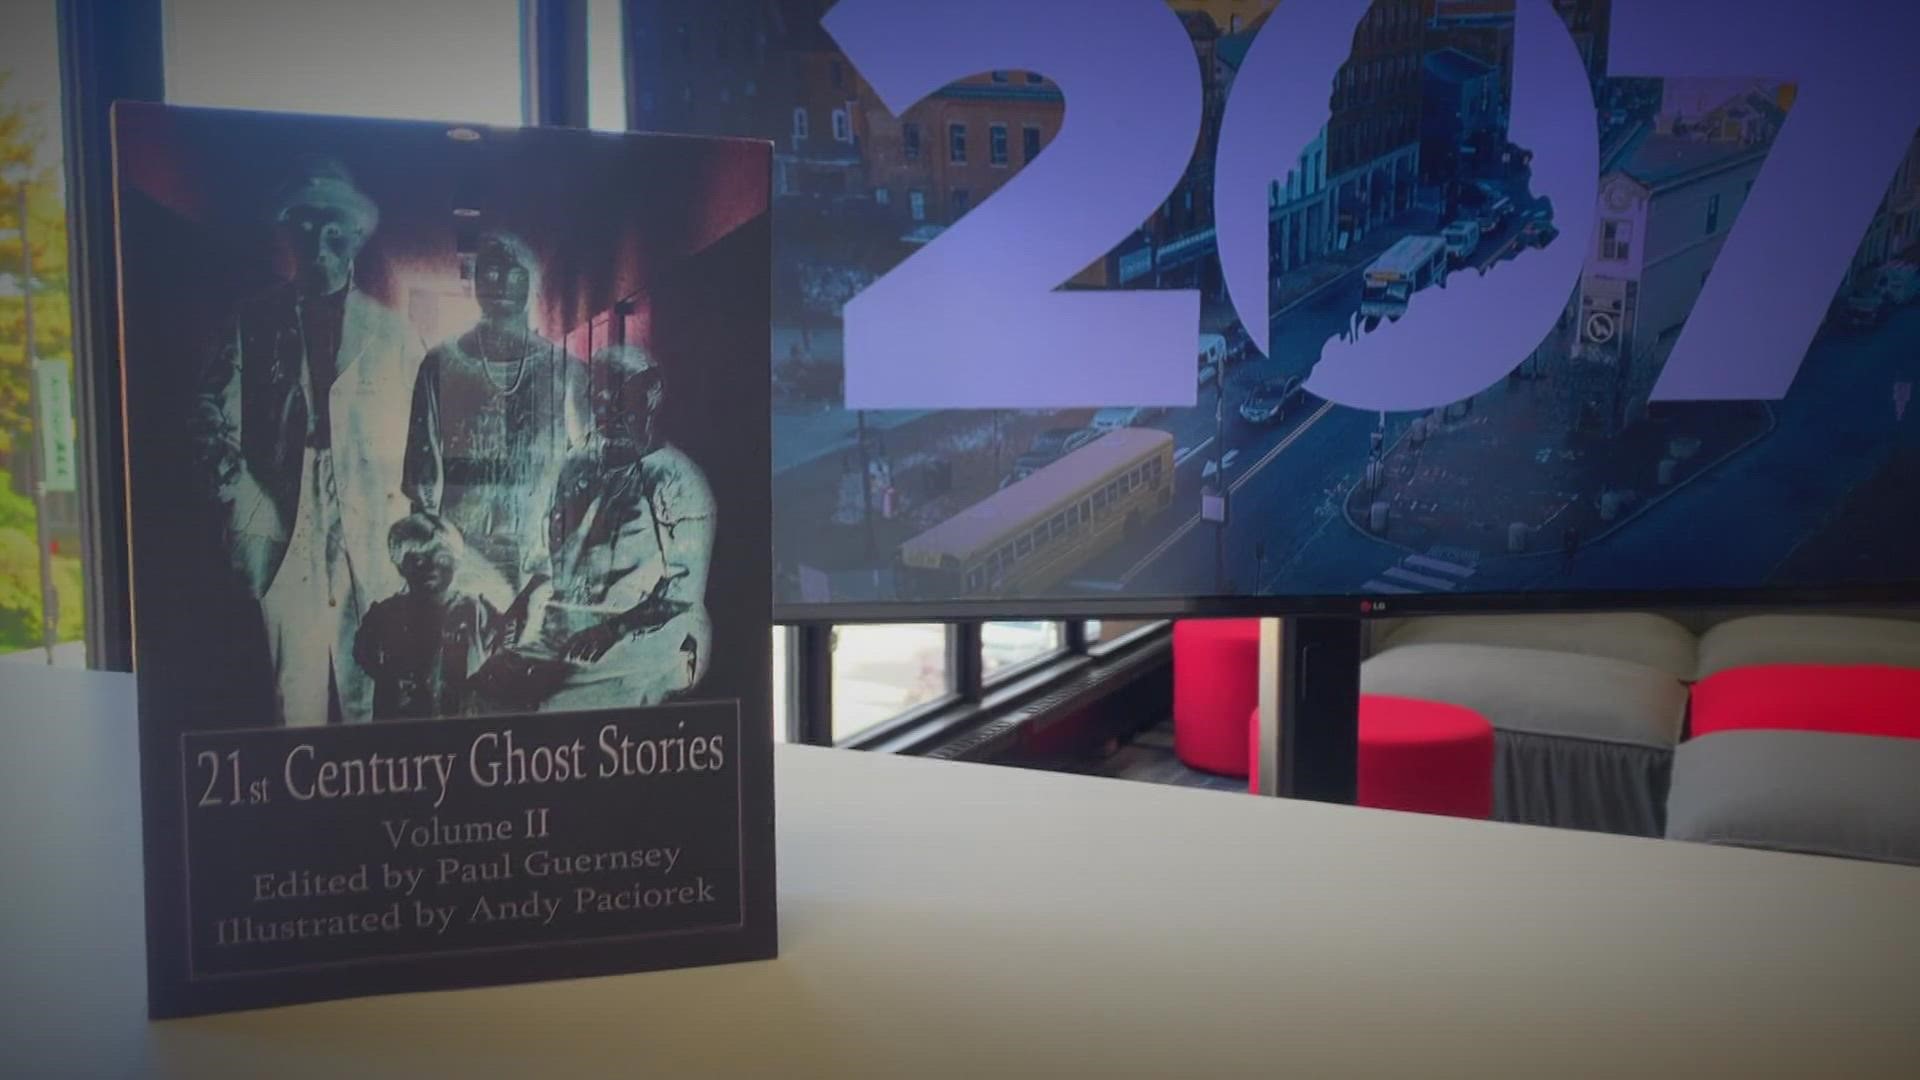 ‘21st Century Ghost Stories: Volume II’ is a collection of short stories that range from hair-raising to thought-provoking.